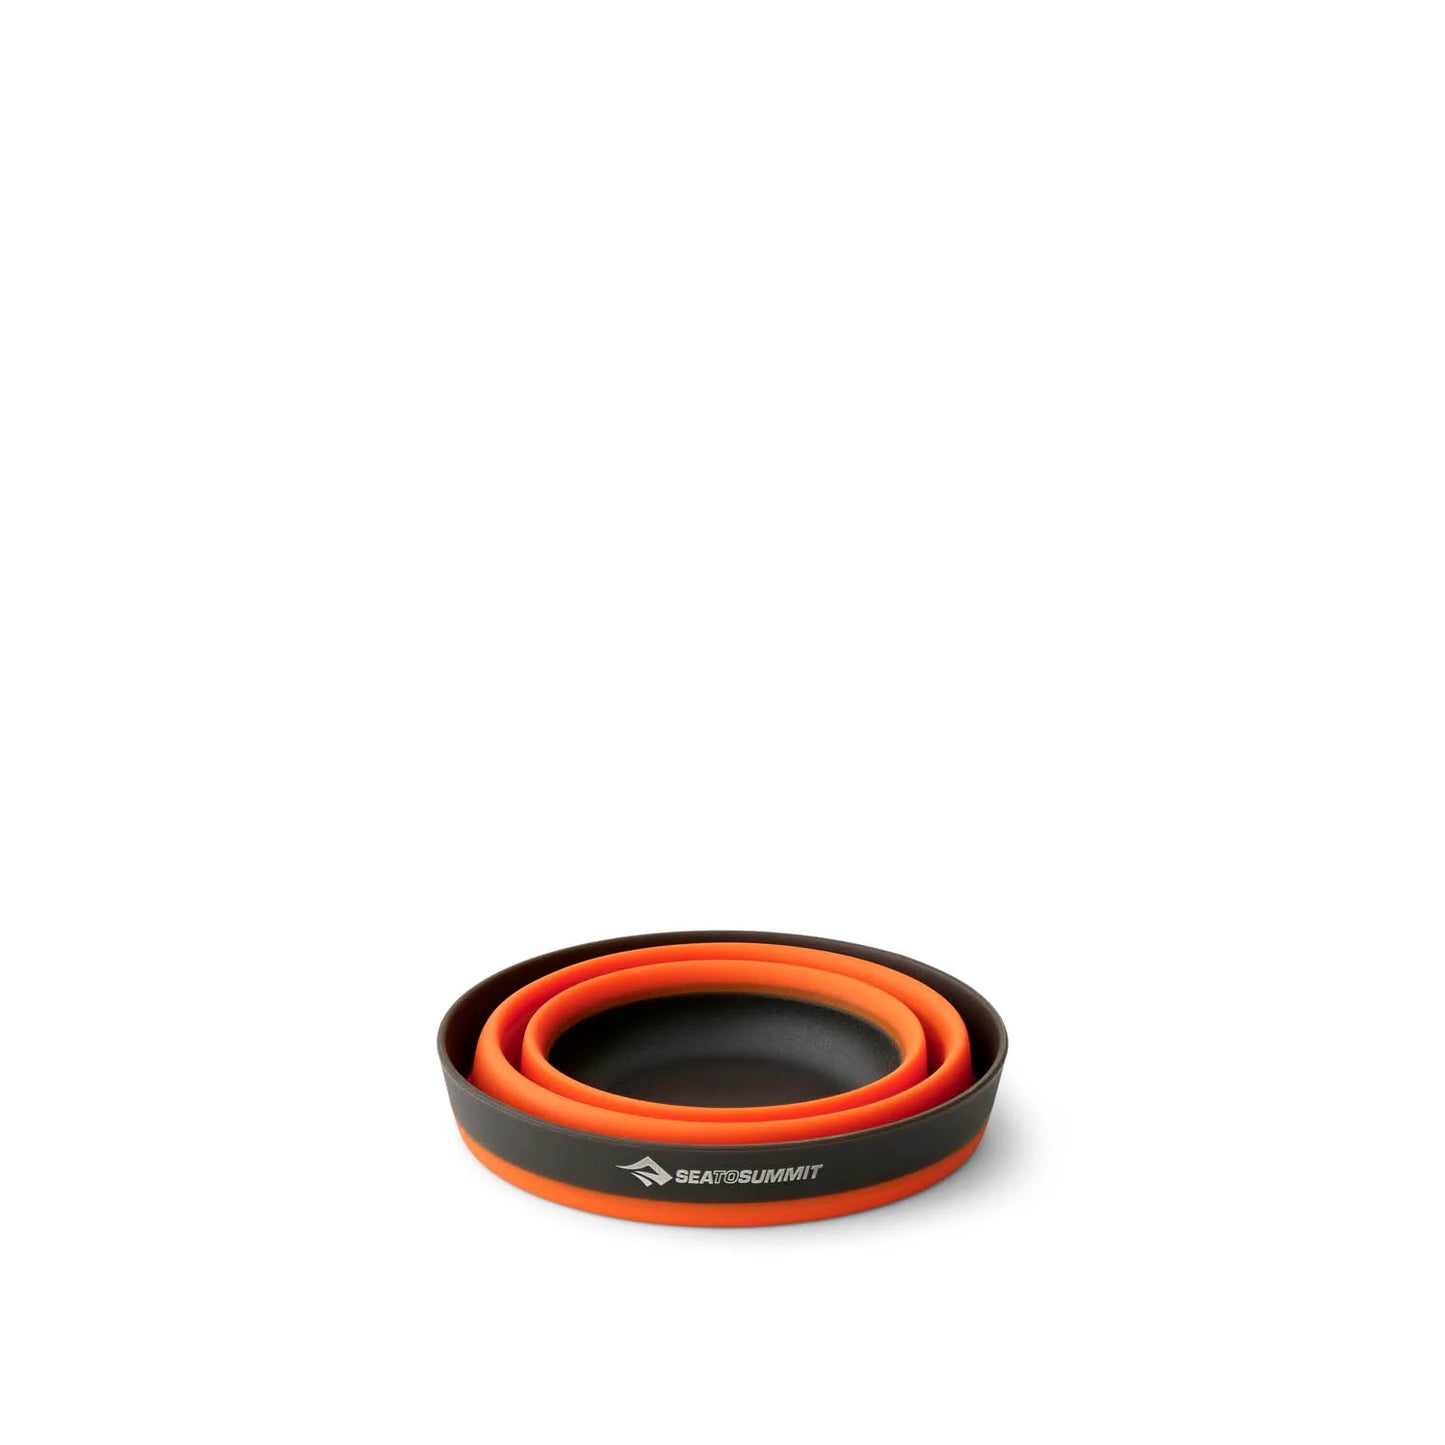 Sea To Summit Frontier UL Collapsible Cup - Orange